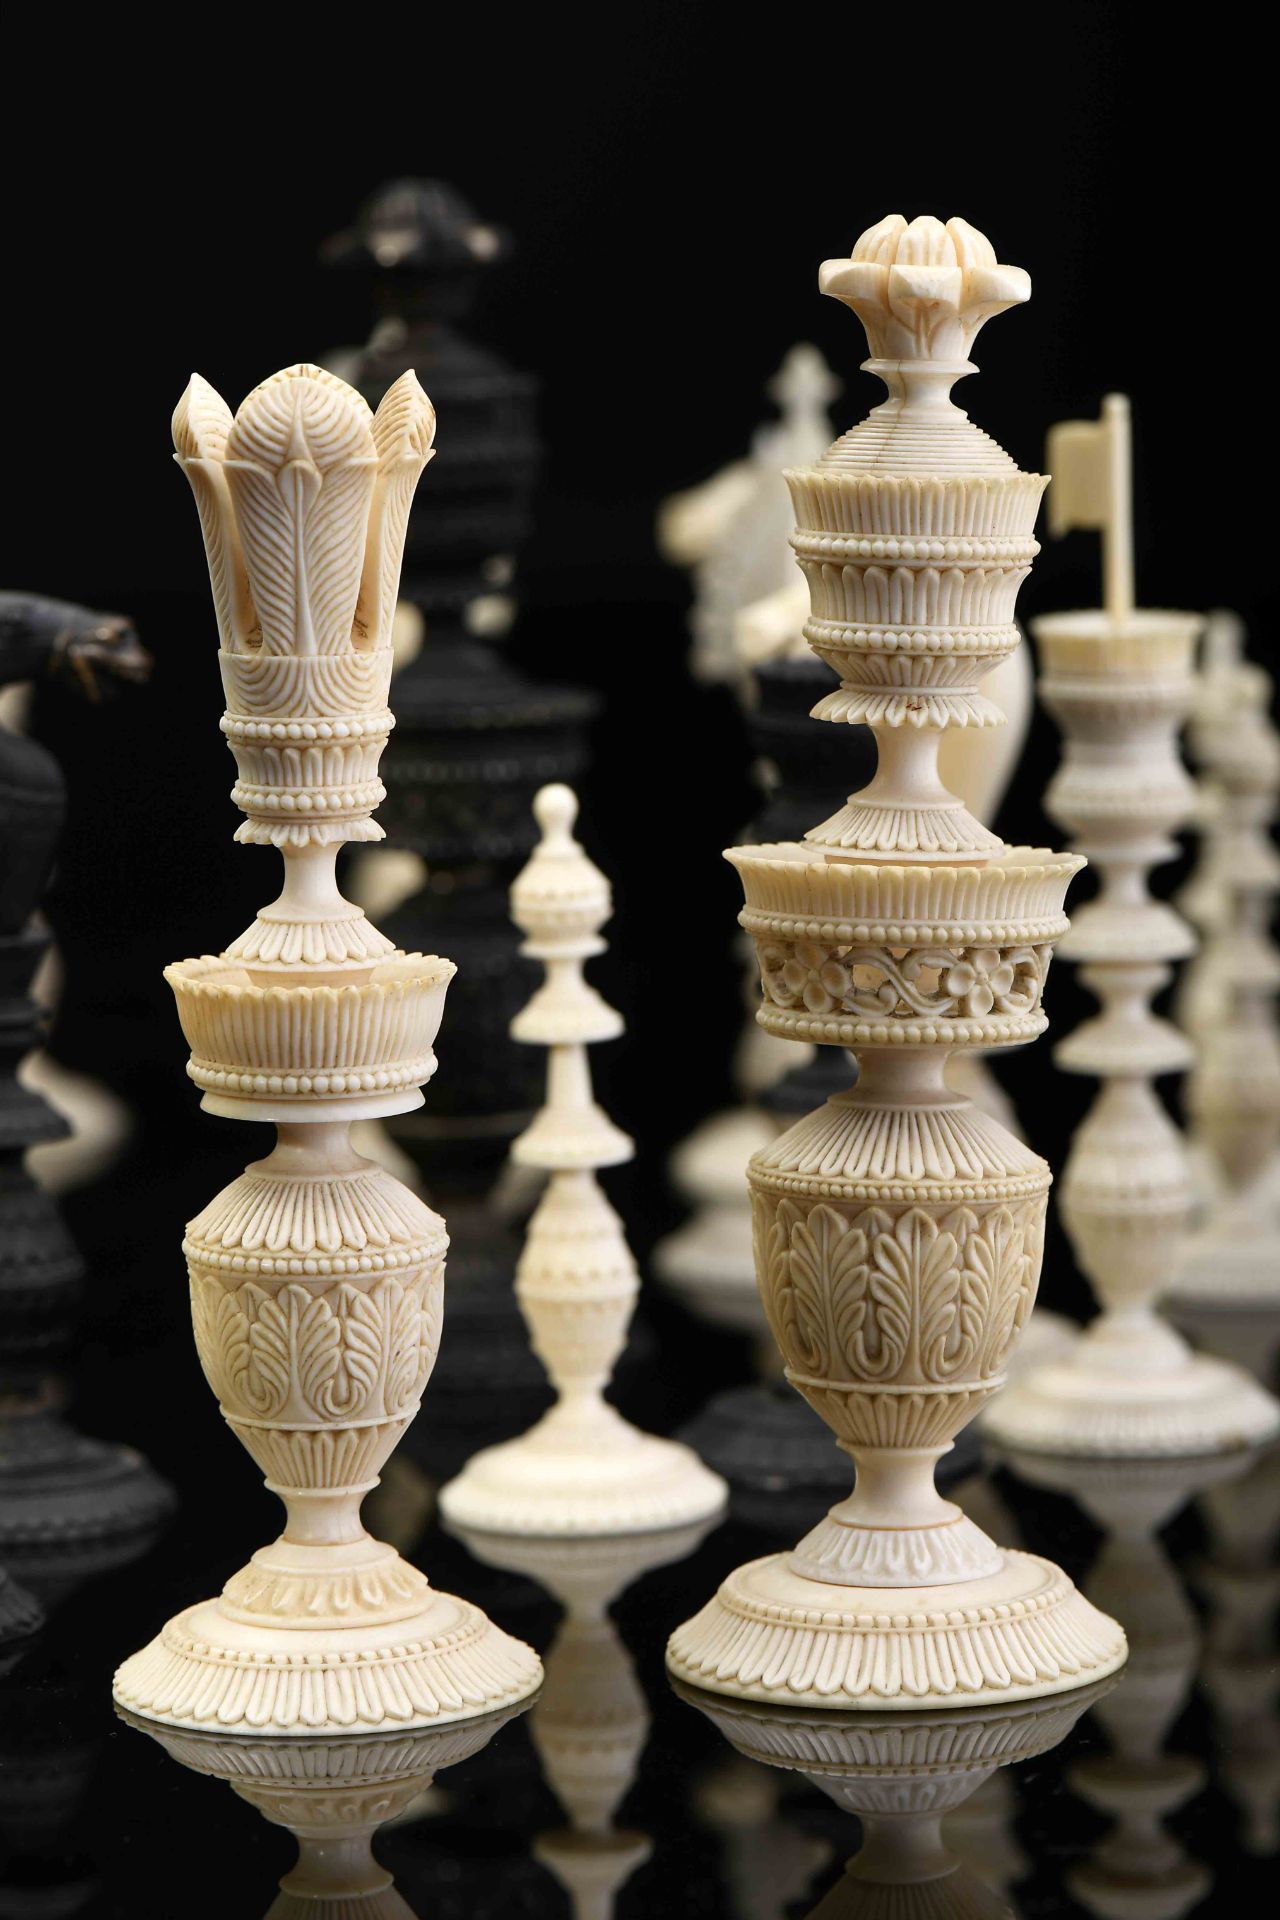 Chess pieces - "Kashmir" style - Image 3 of 5